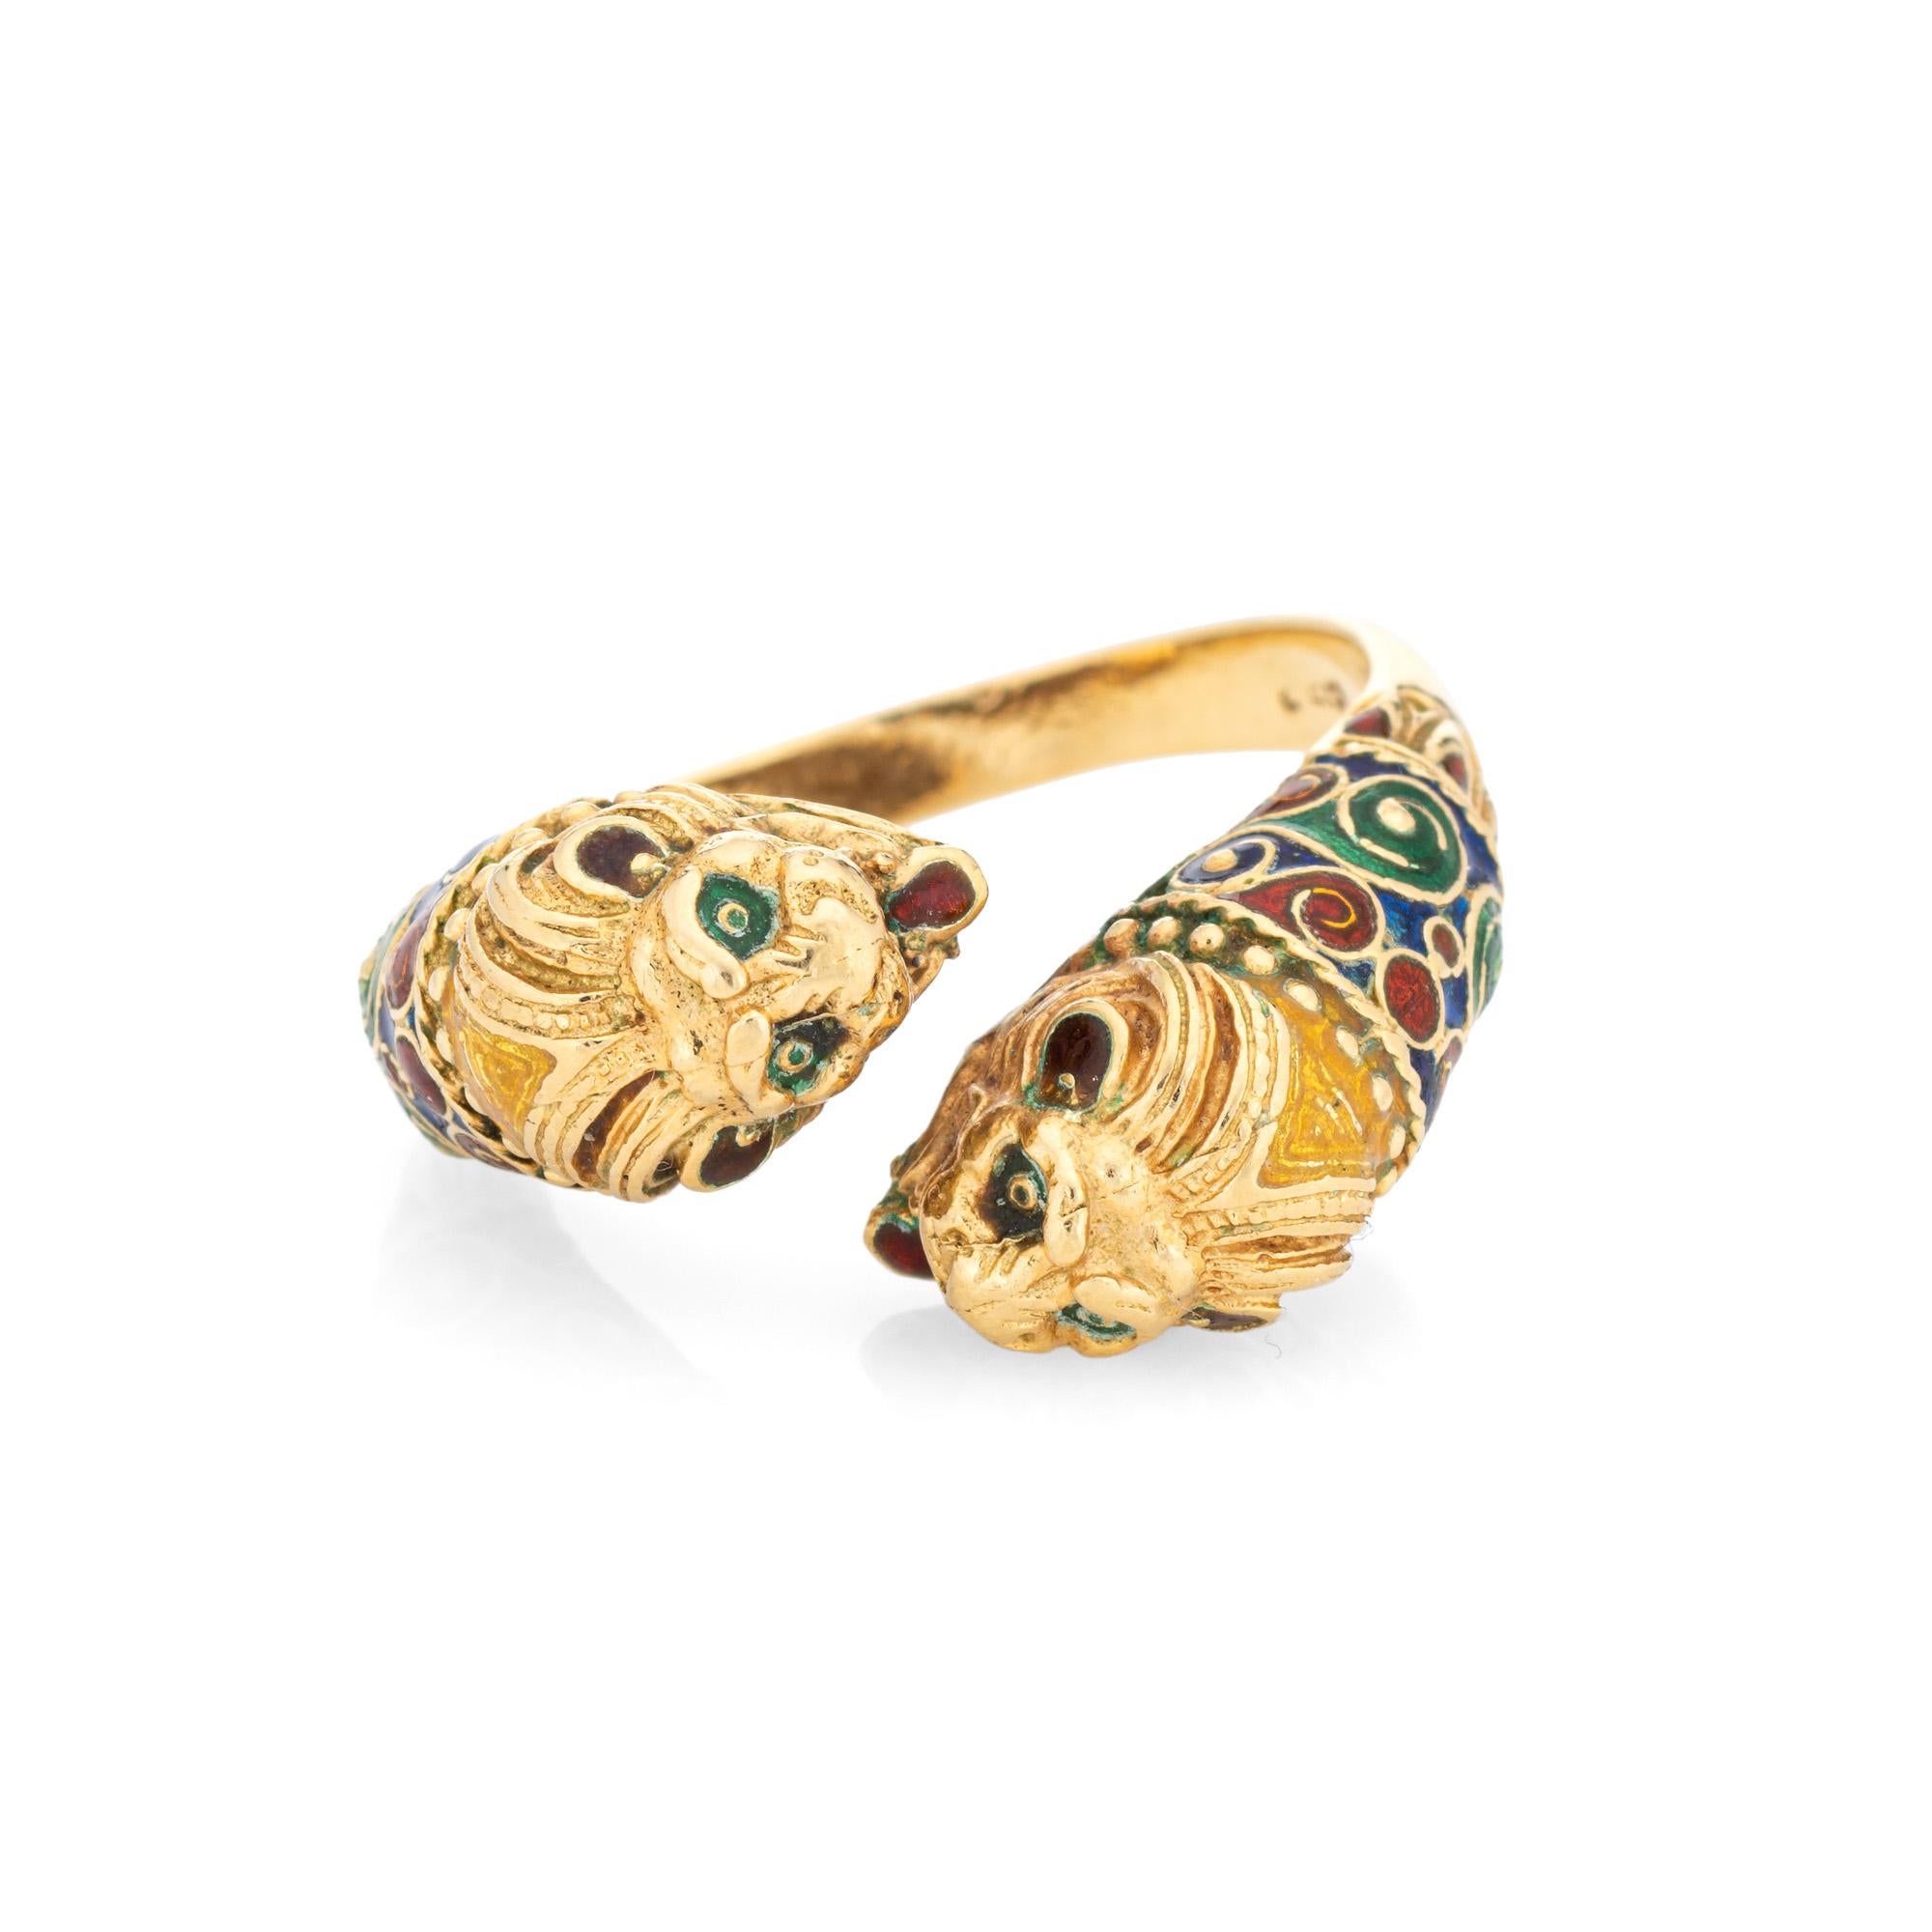 Stylish vintage double Lion ring crafted in 18 karat yellow gold (circa 1980s). 

The elaborate double Lion features a blue, green and orange enameled patterned body, The double headed Lion bypass design makes a great statement on the hand. The low